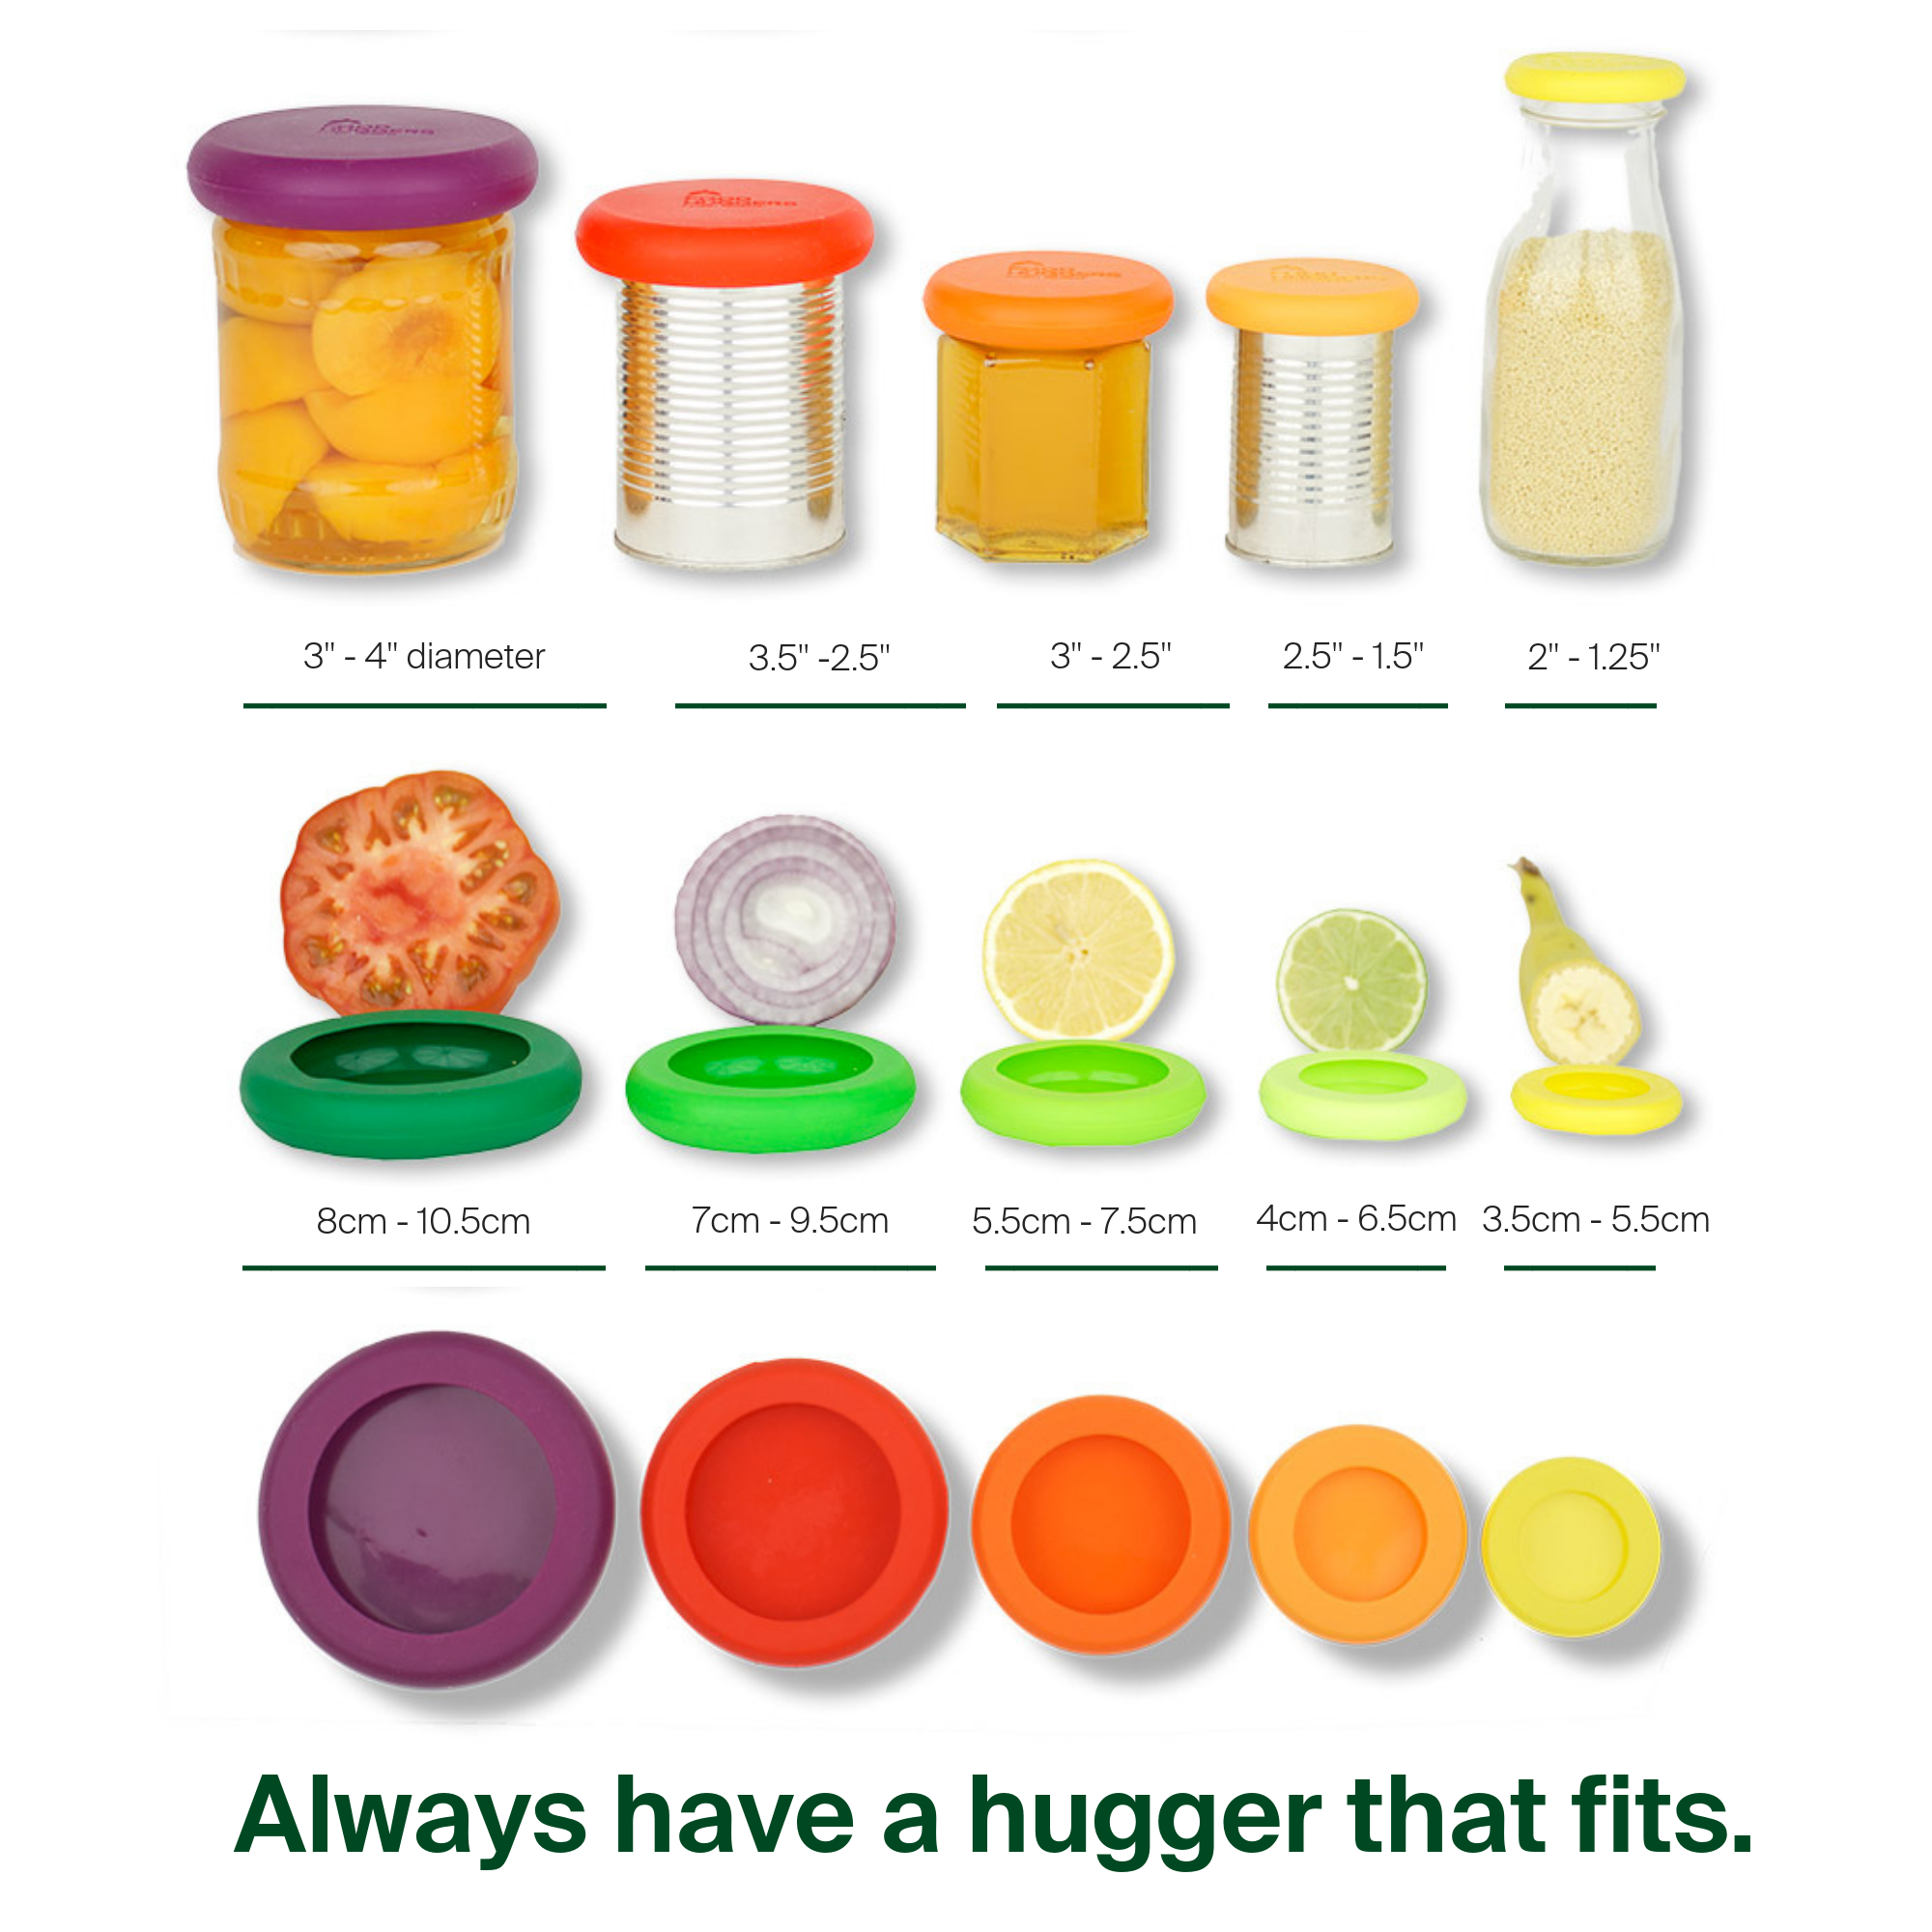 Food Huggers©: Reduce Plastic, Save your food and money